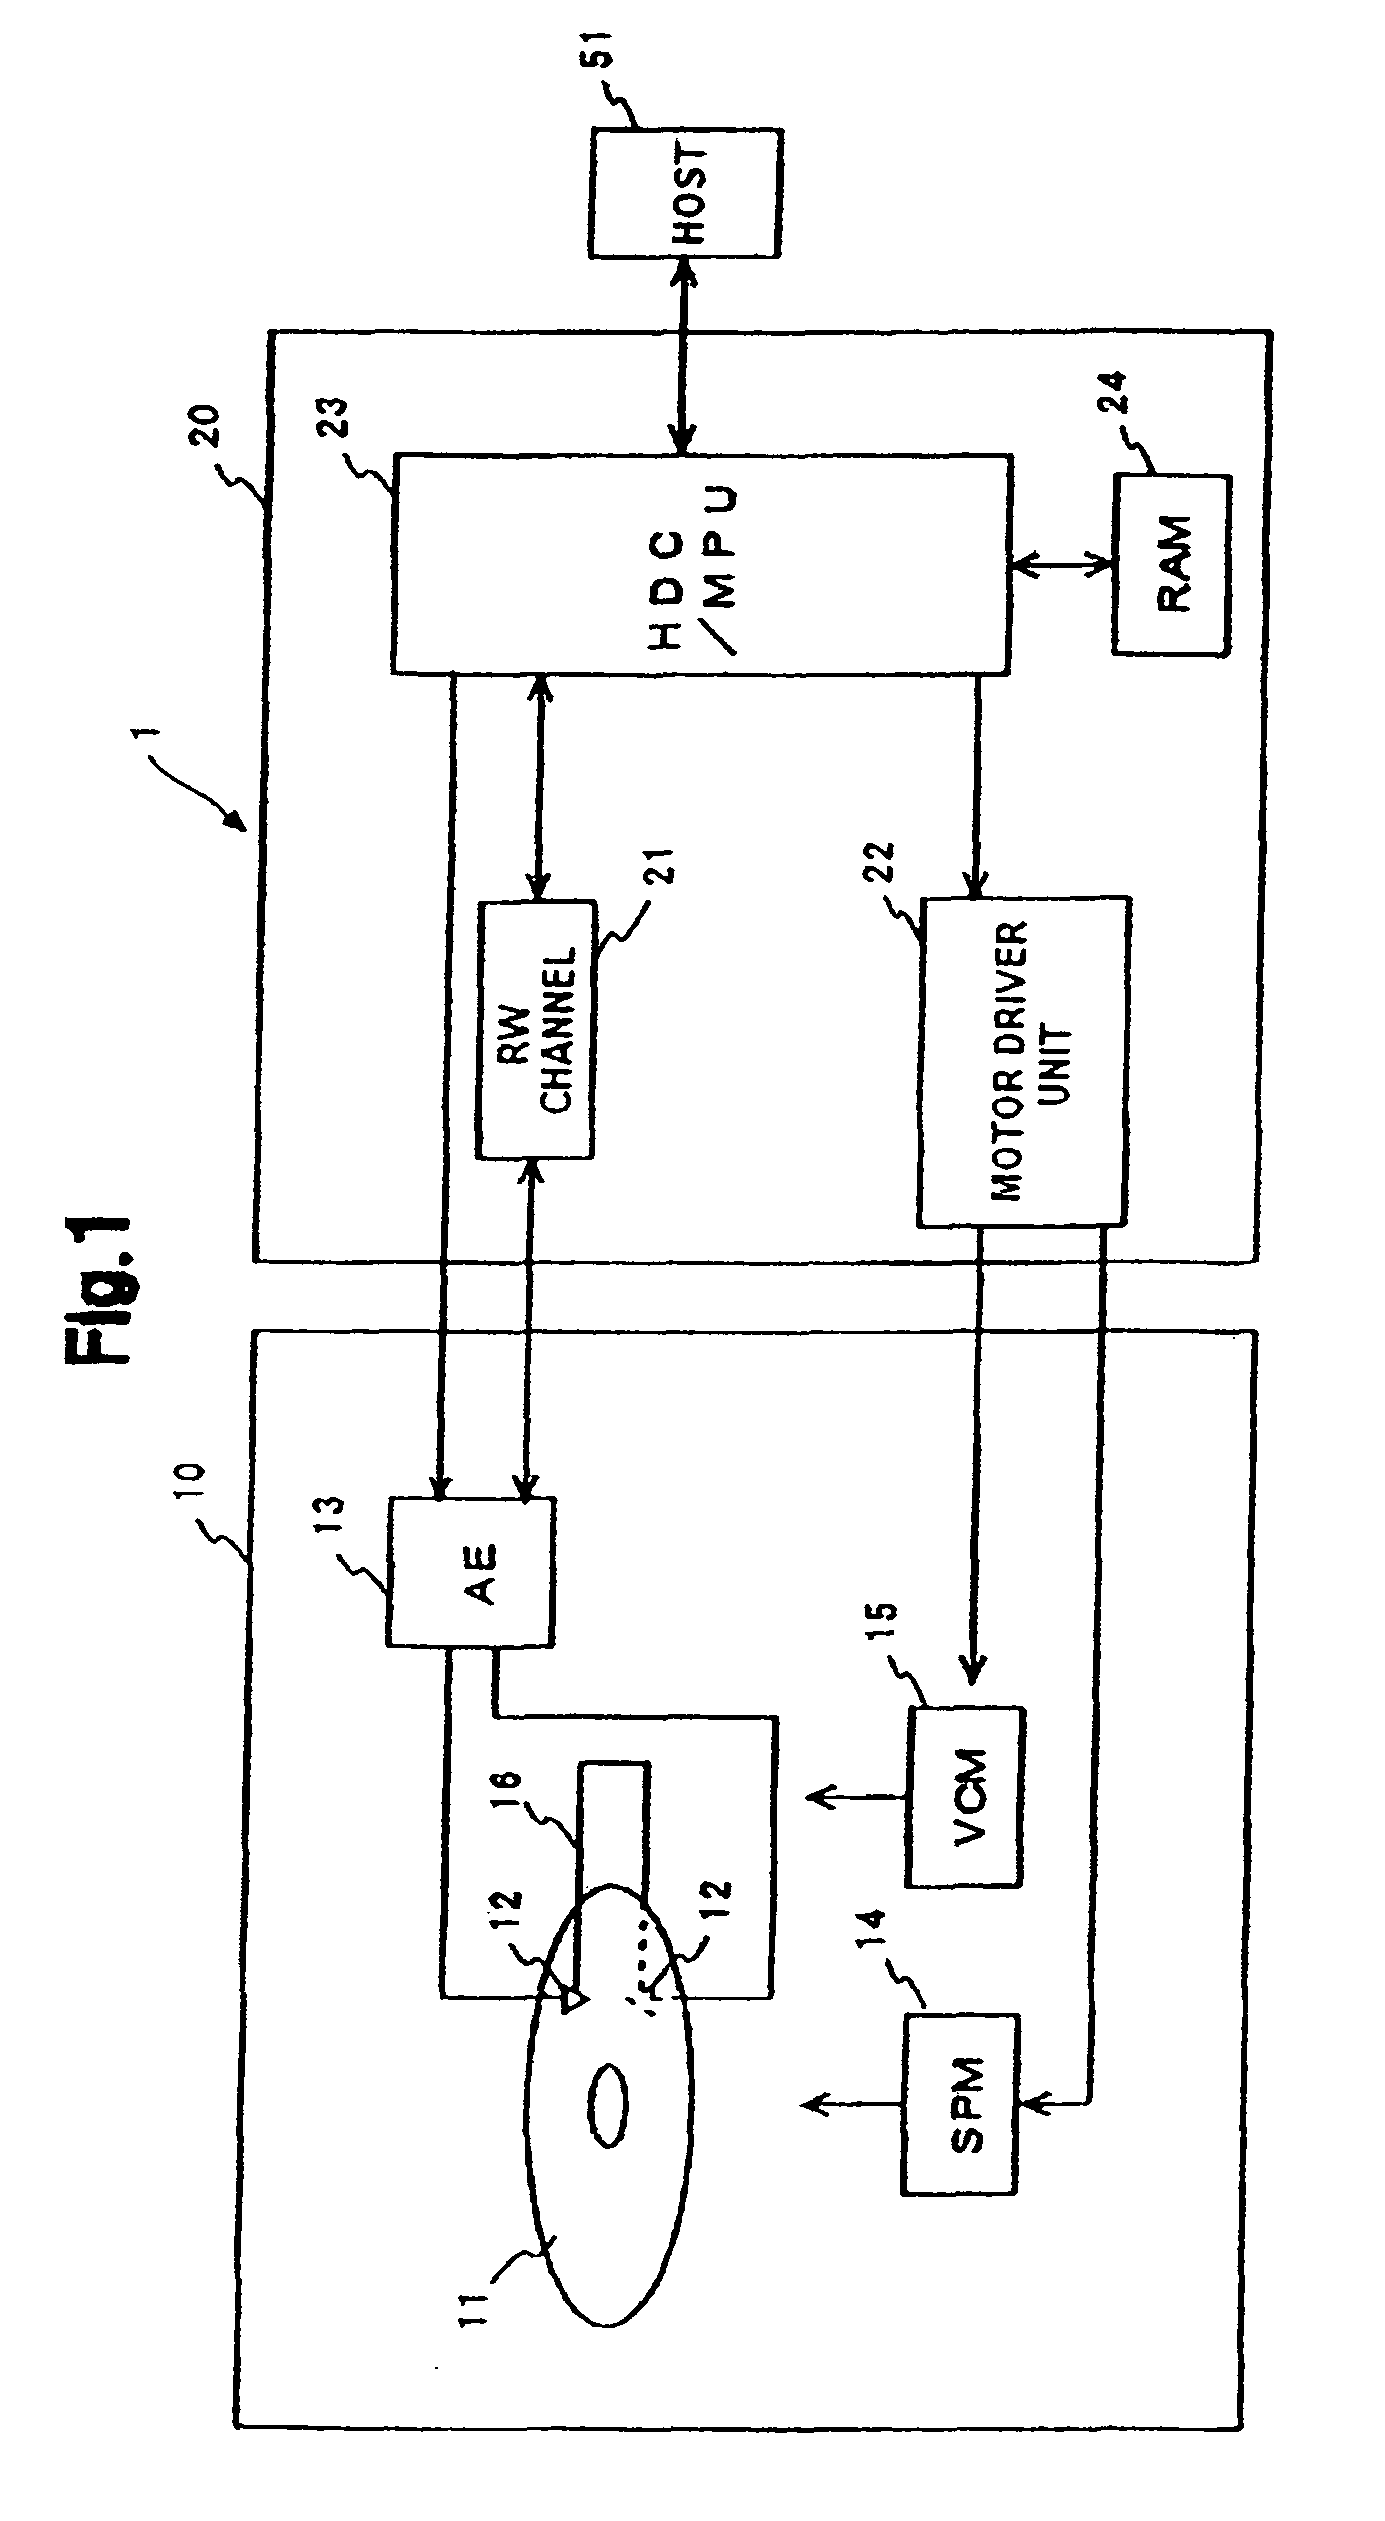 Disk drive device, manufacturing method thereof, and method for setting heater power value for a heater for adjusting a clearance